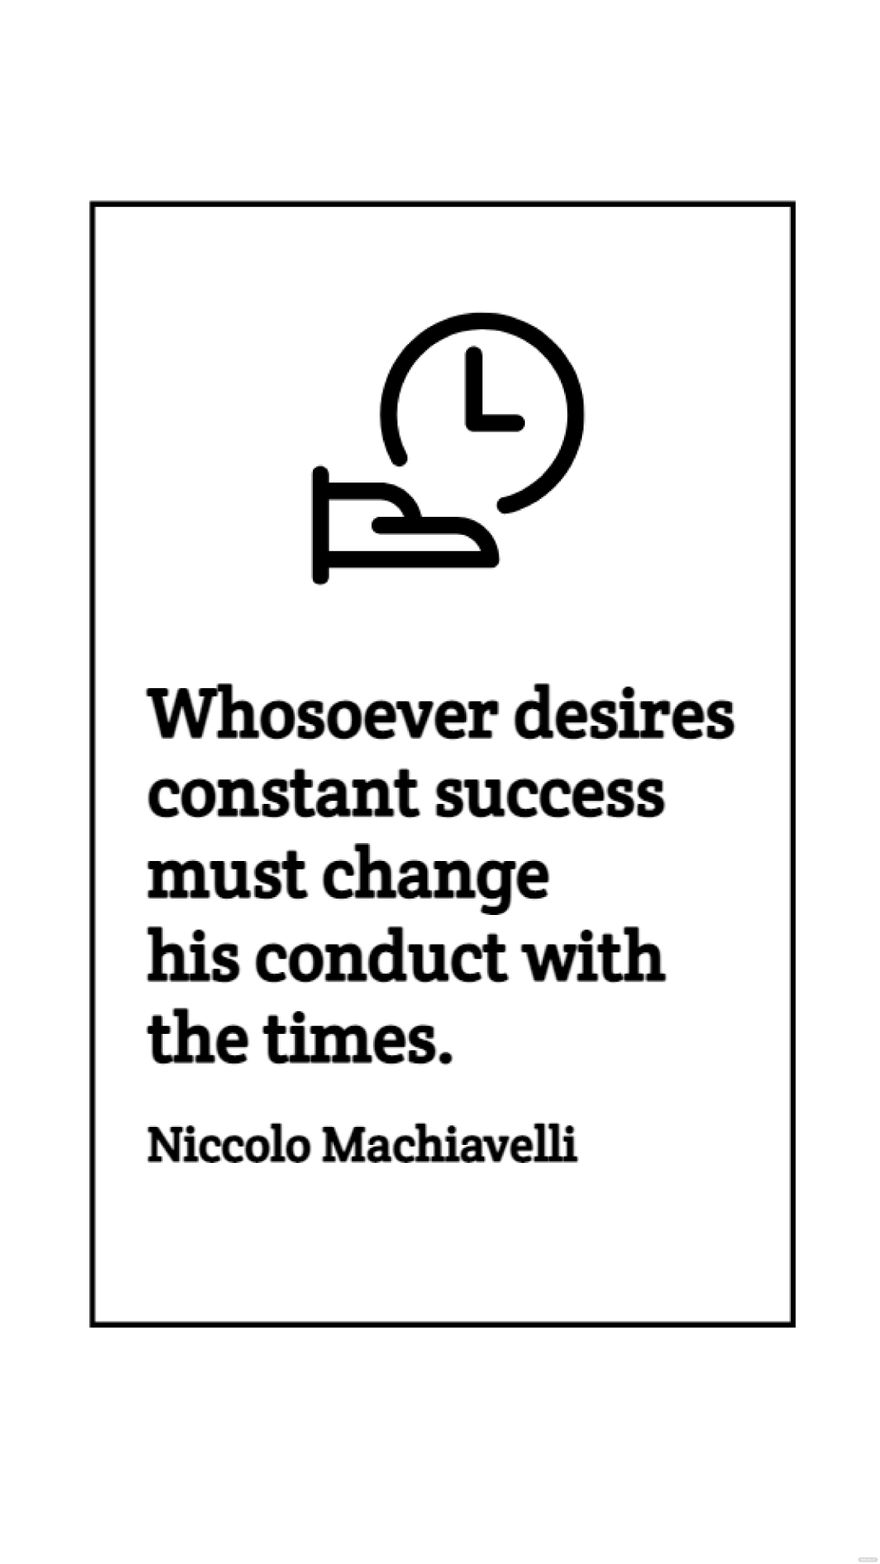 Free Niccolo Machiavelli - Whosoever desires constant success must change his conduct with the times. in JPG